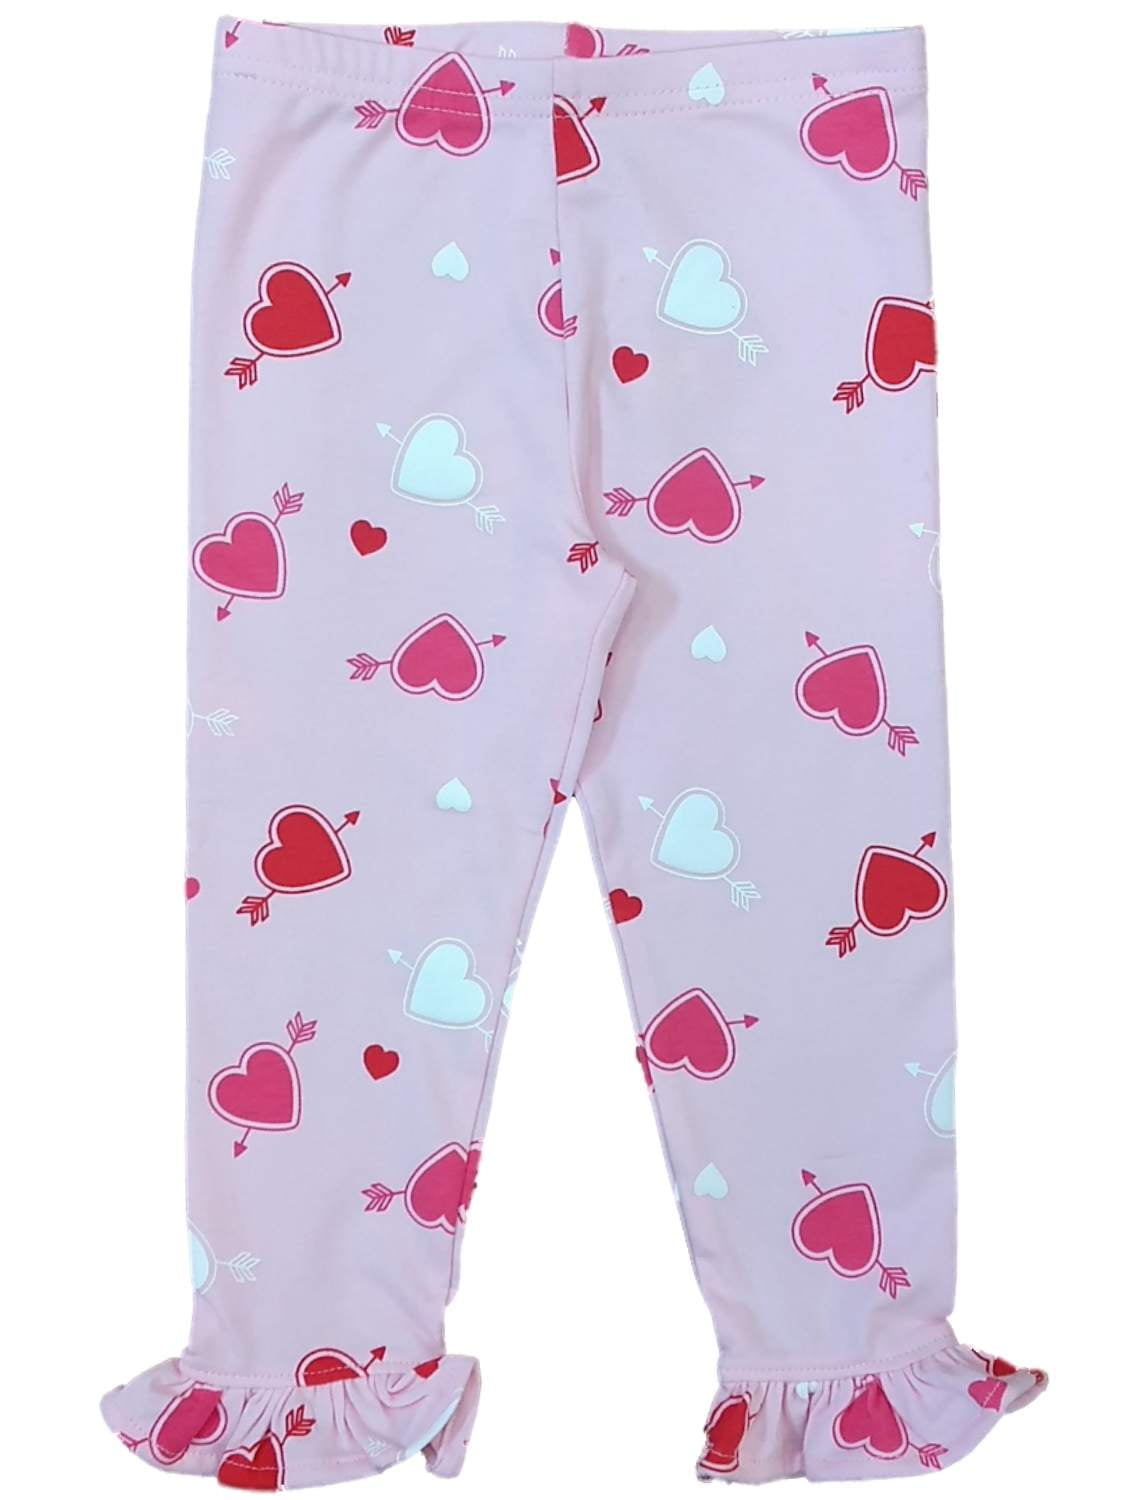 NEW Love Made Me Shirt Heart Leggings Girls Valentines Day Outfit 2T 3T 4T 5T 